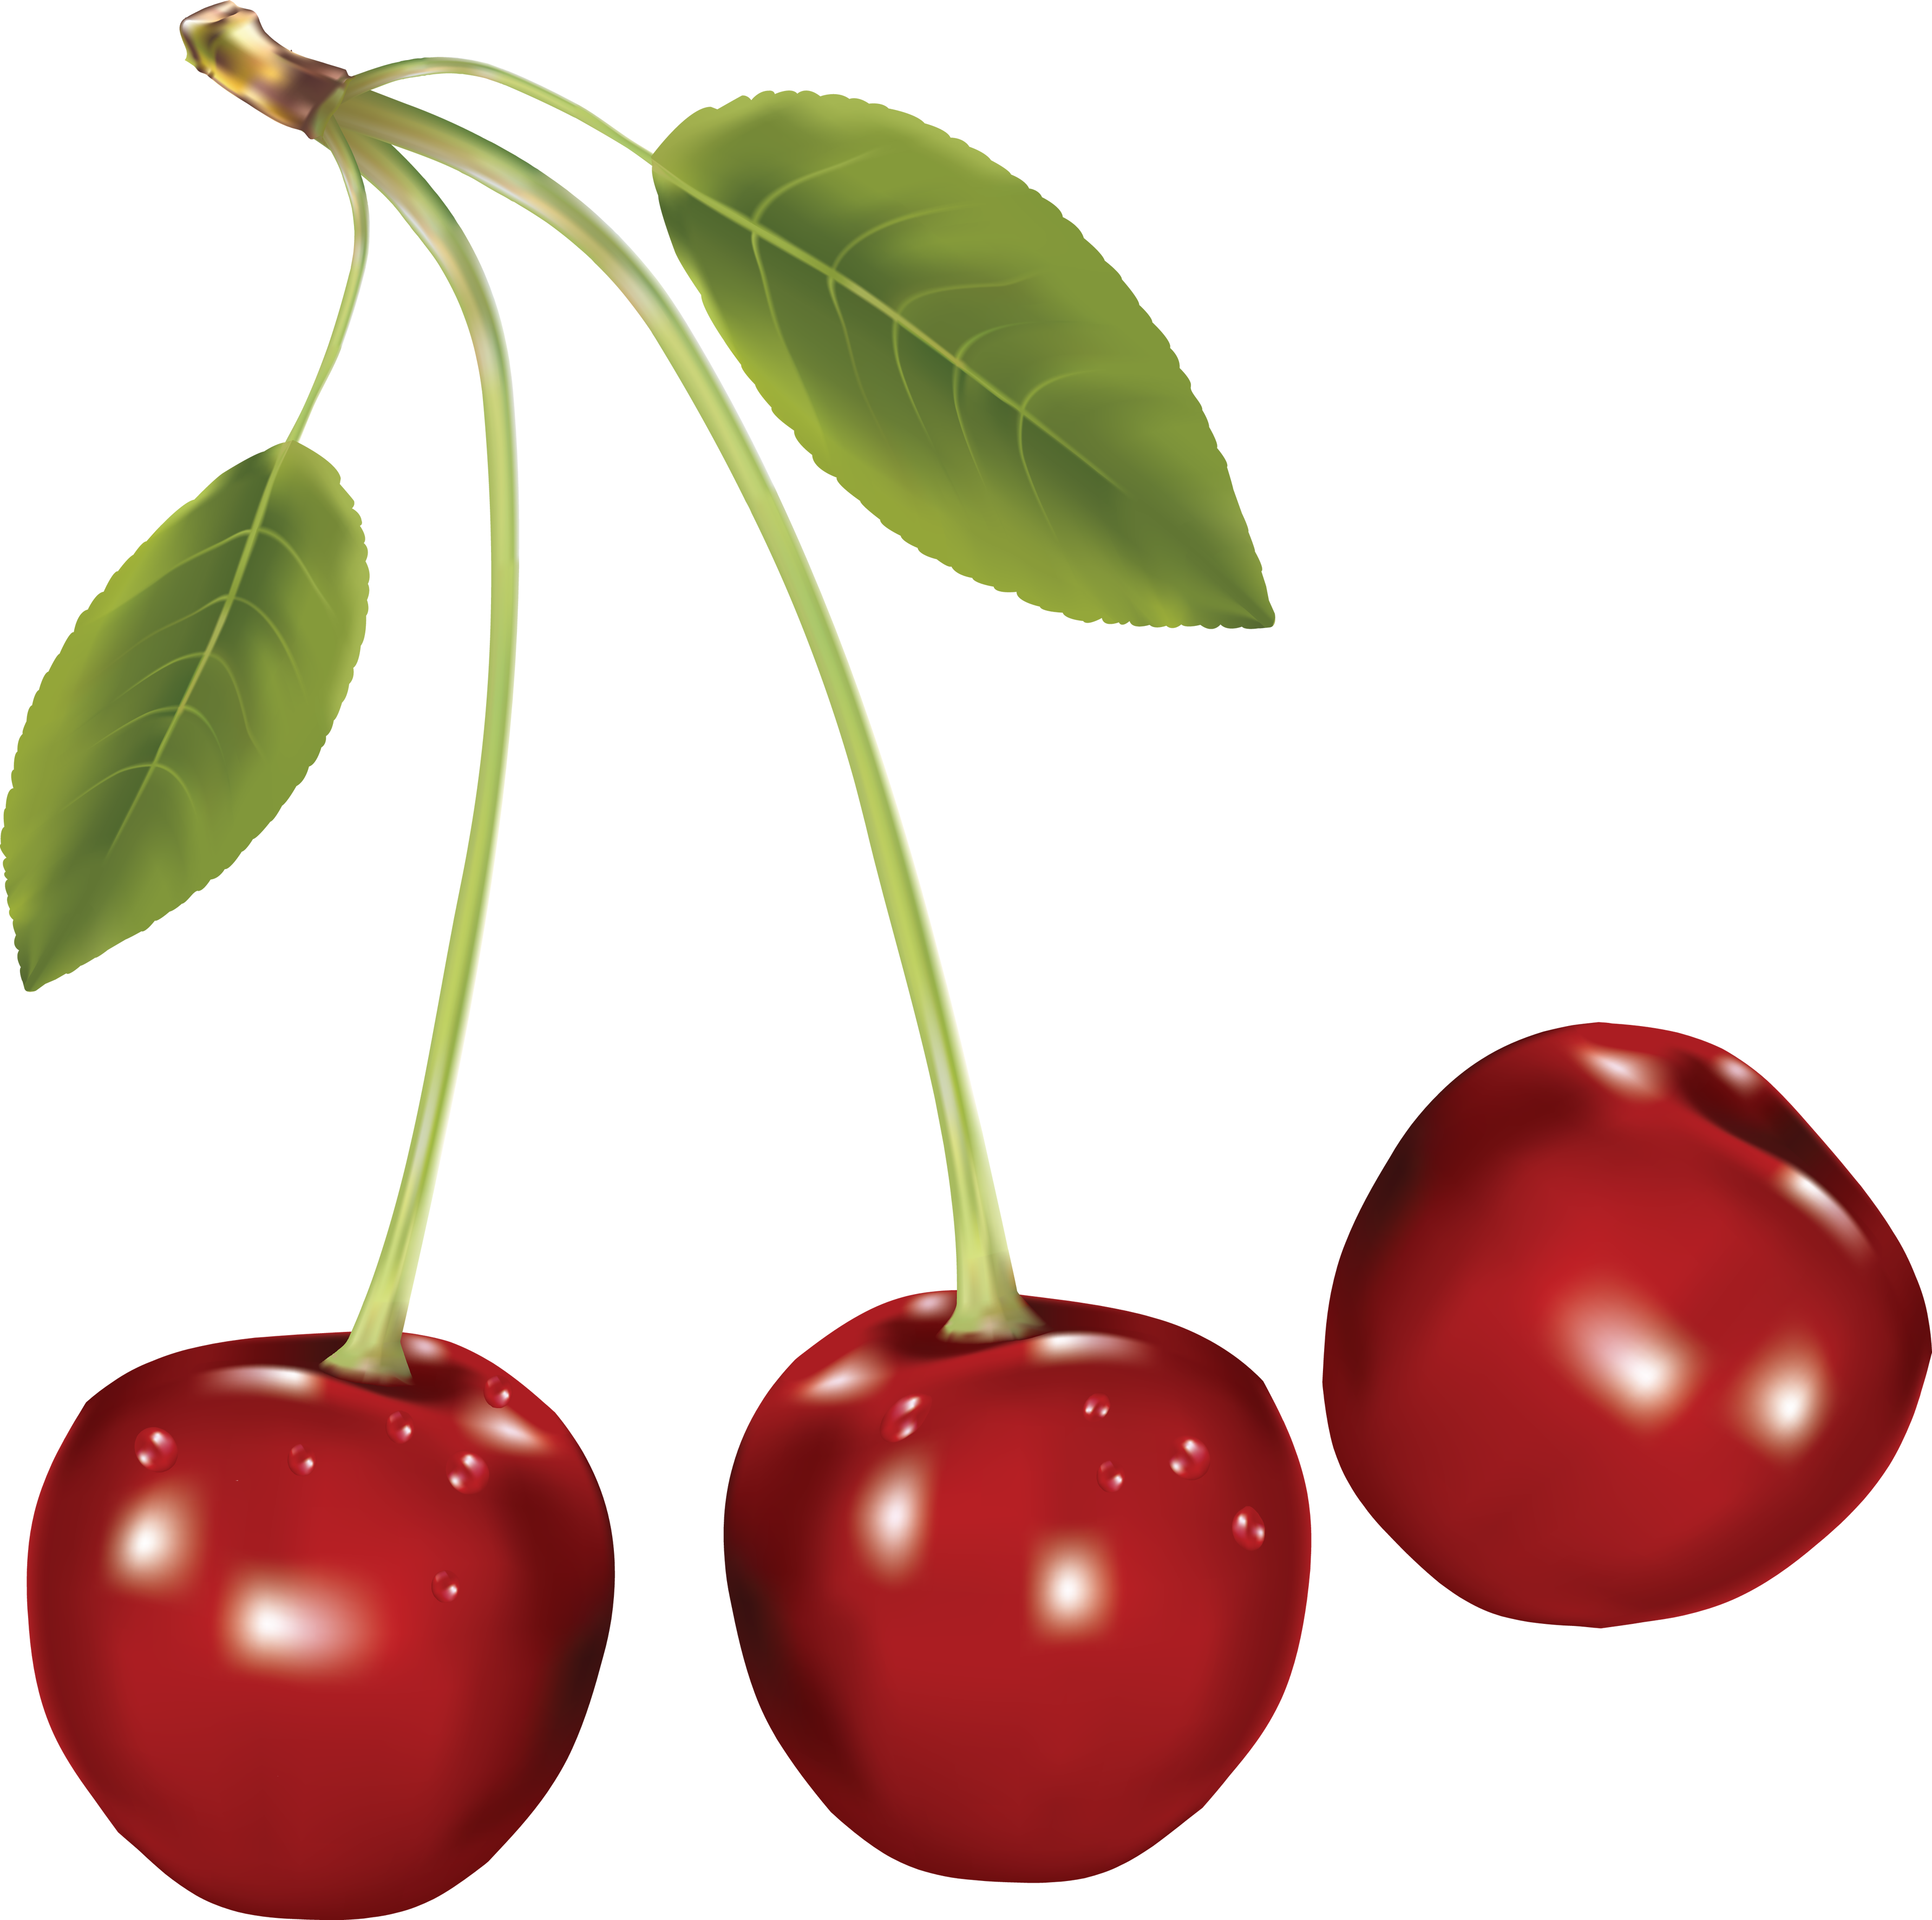 Cherrys PNG Image - PurePNG | Free transparent CC0 PNG Image Library